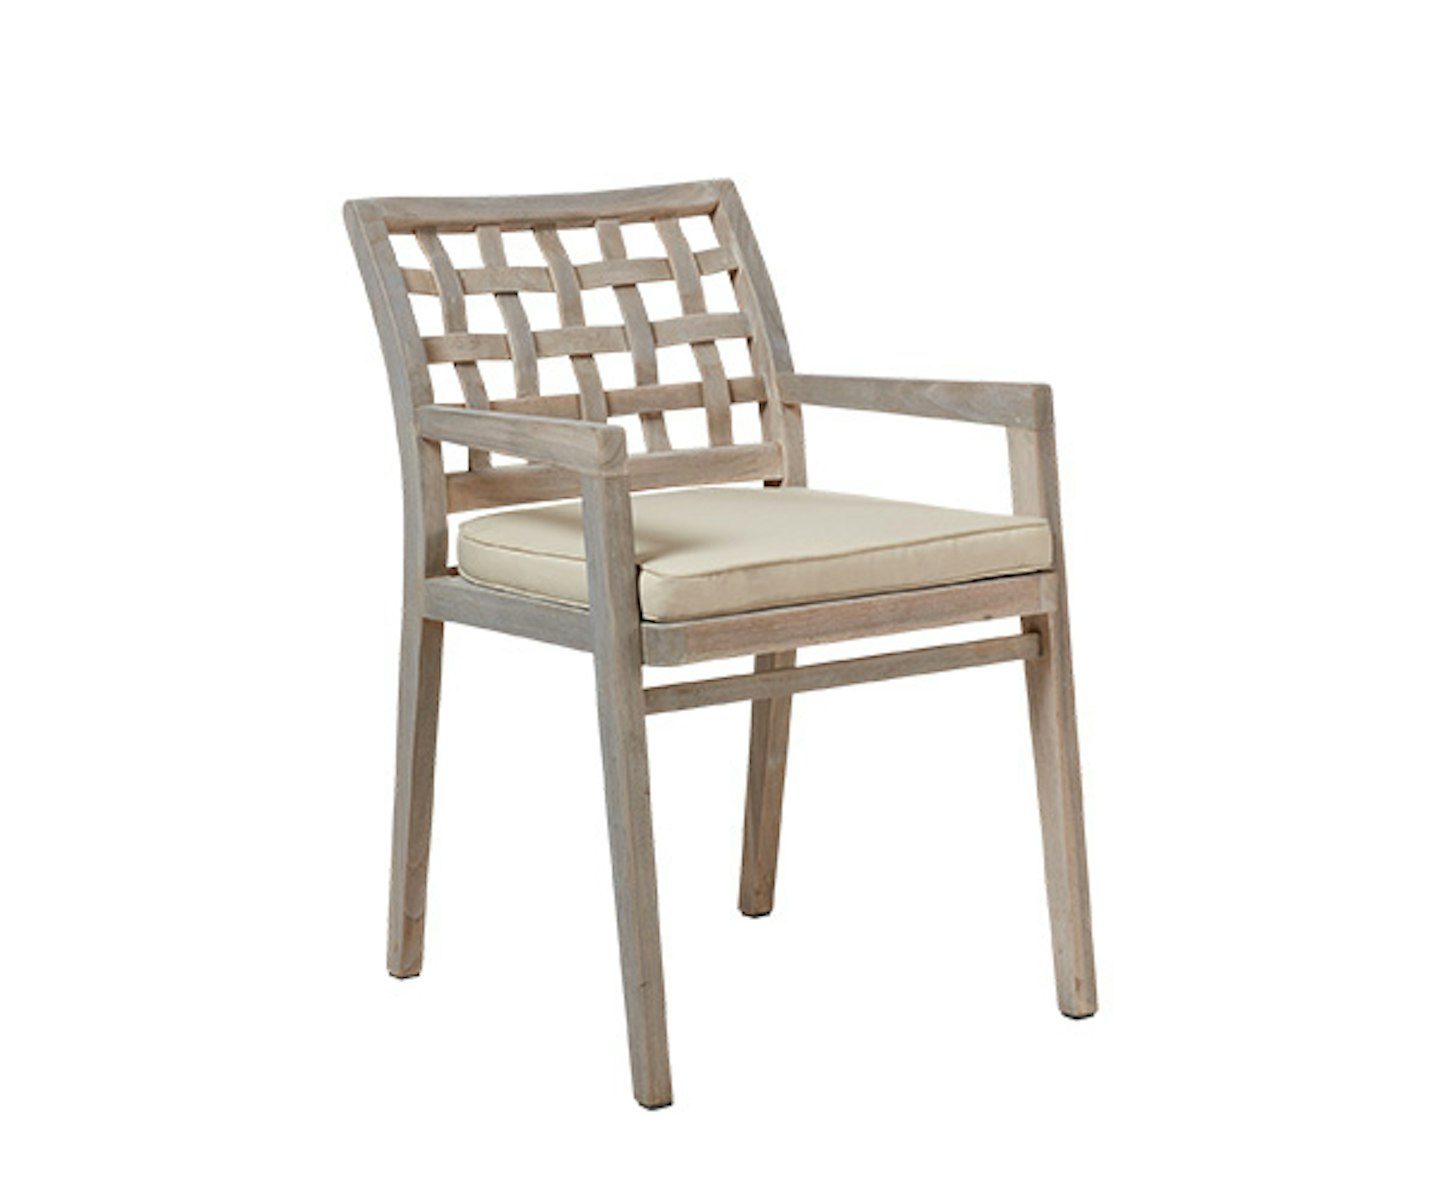 Terrazzin Dining Chair - Natural